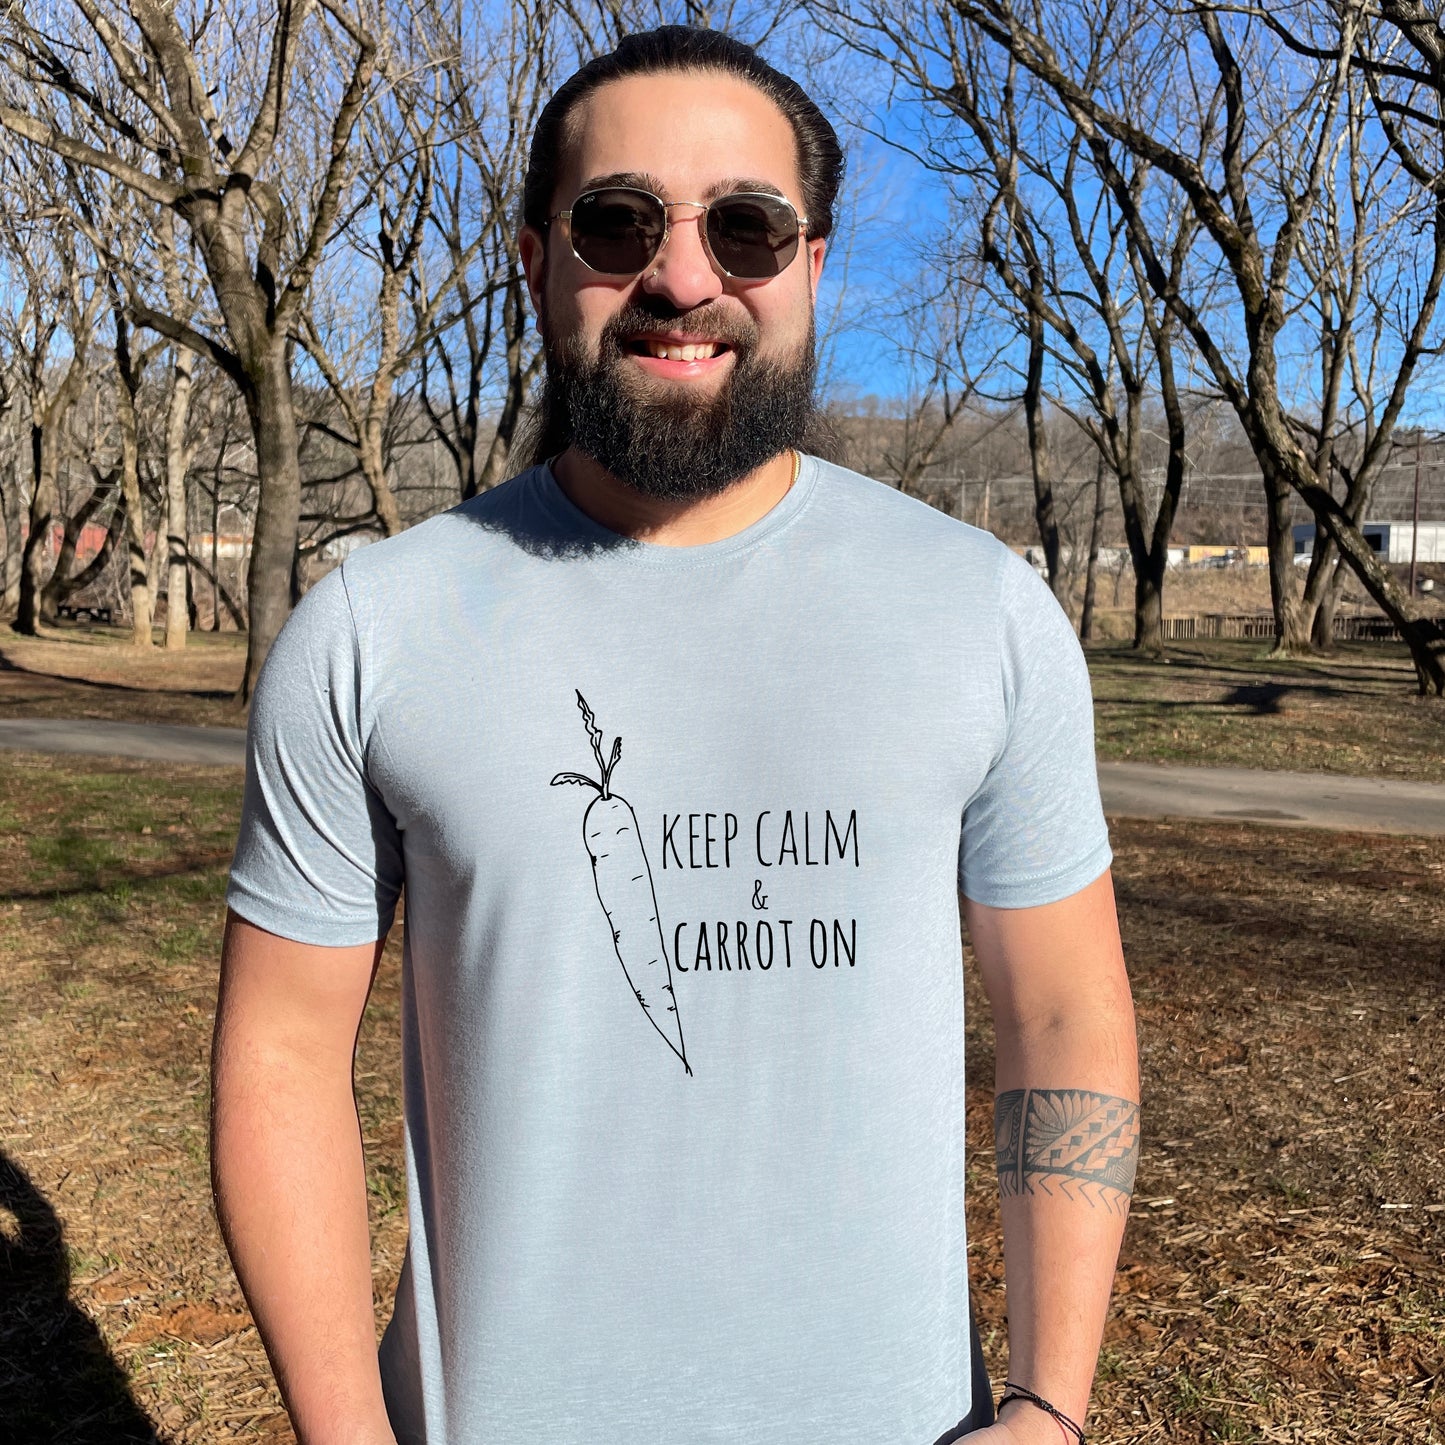 Keep Calm and Carrot On - Men's / Unisex Tee - Stonewash Blue or Sage